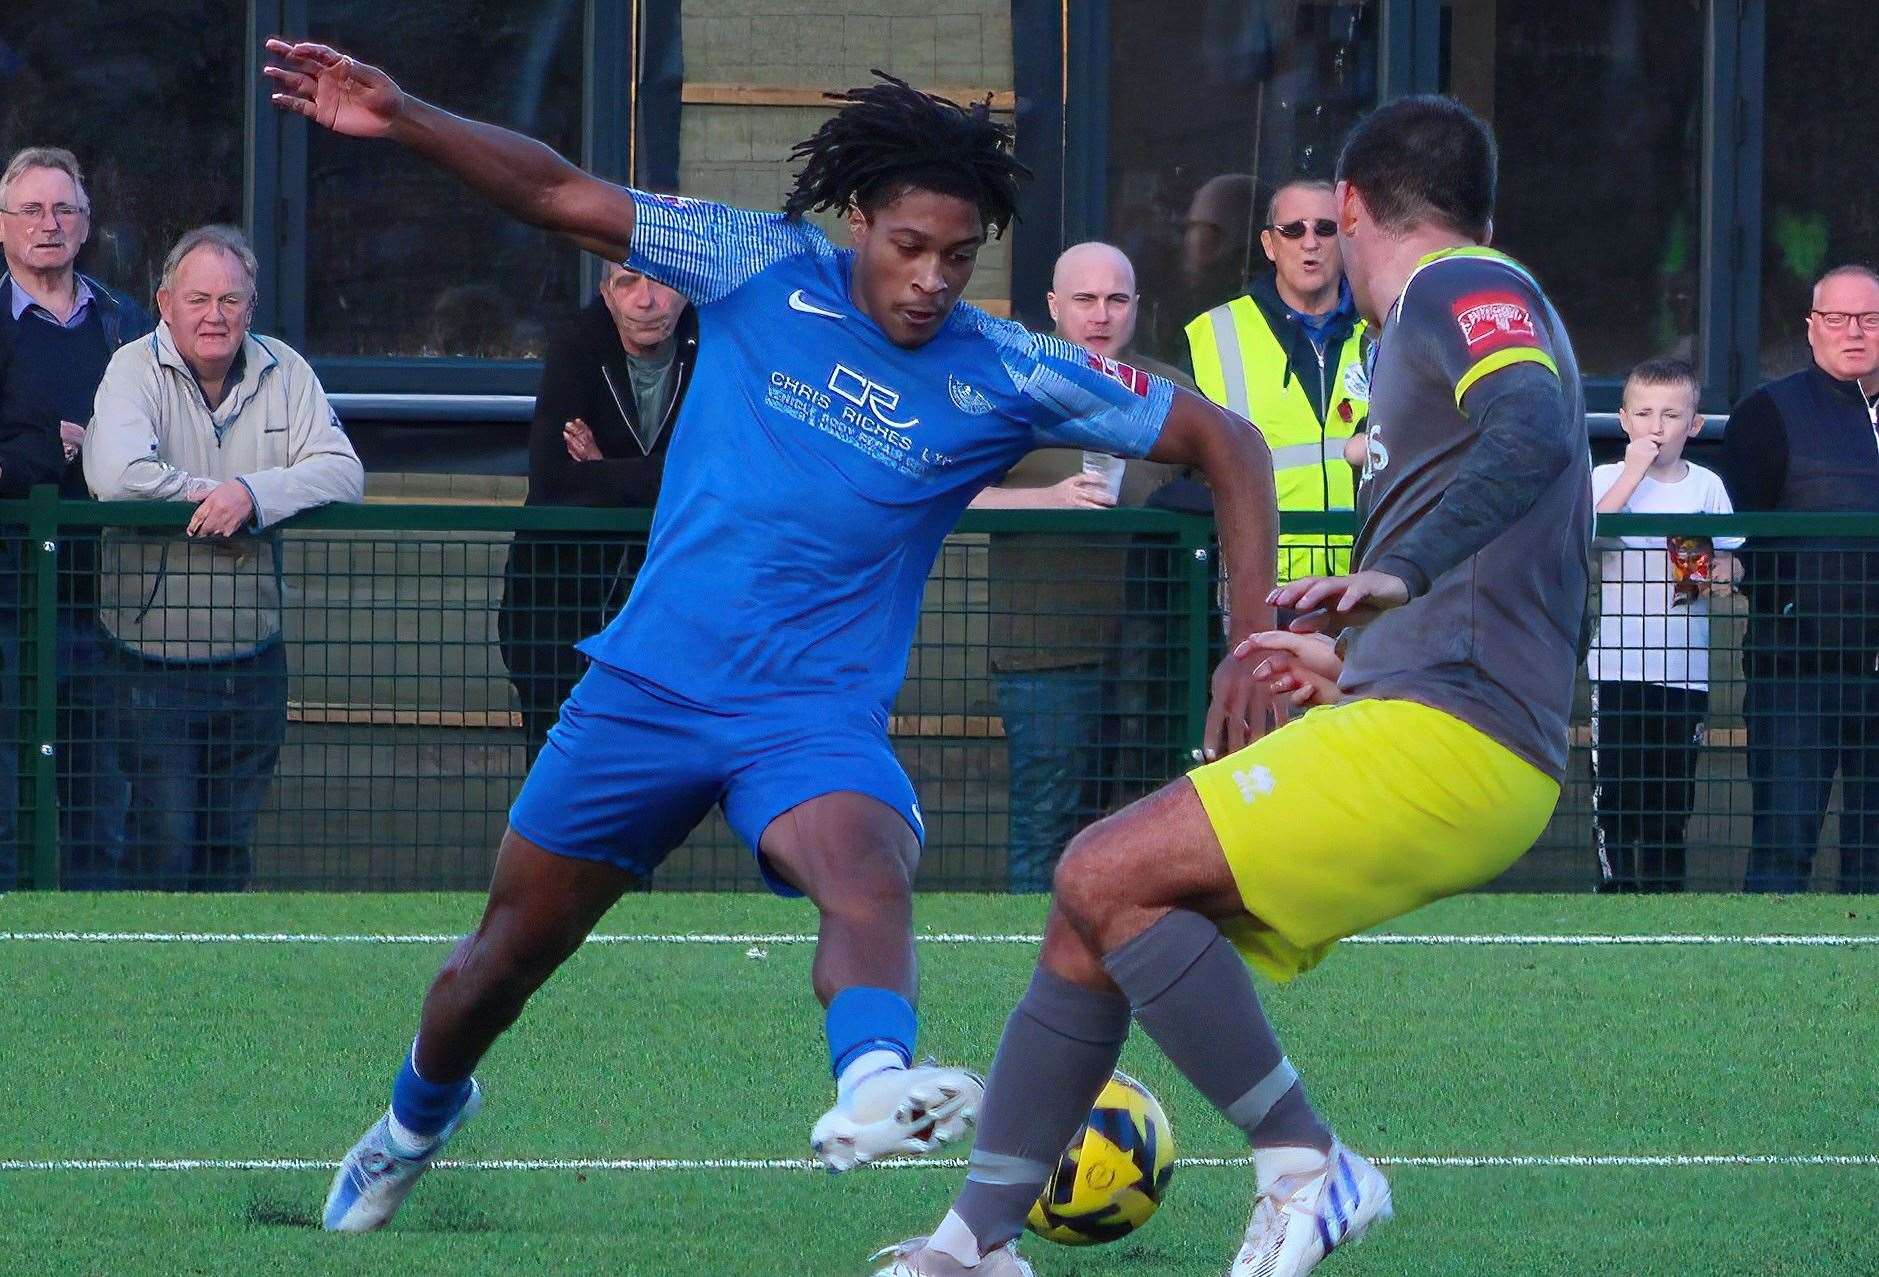 Herne Bay's Kymani Thomas this season in action. Picture: Keith Davy